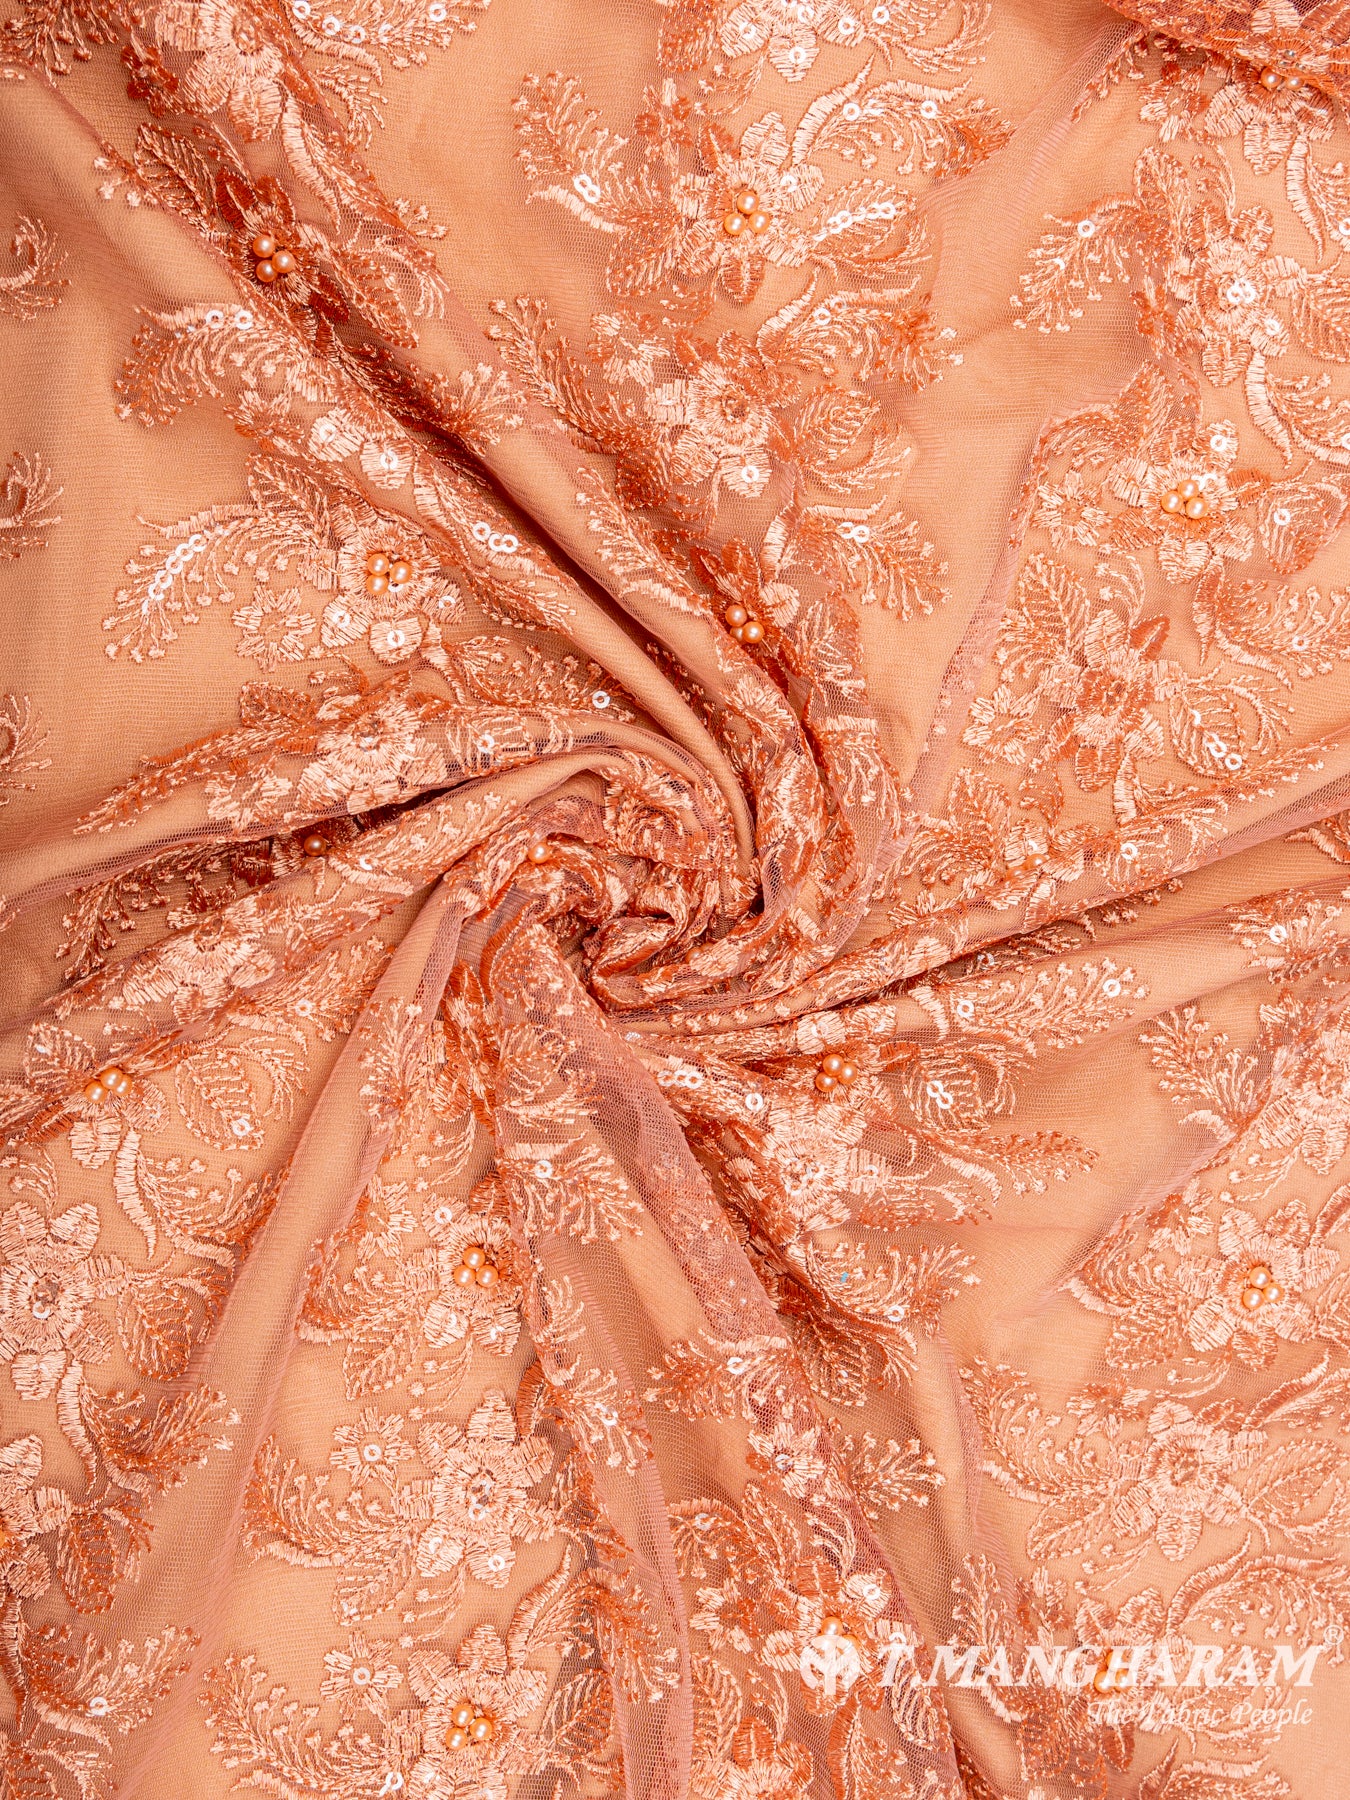 Peach Net Embroidery Fabric - EC6520 view-1